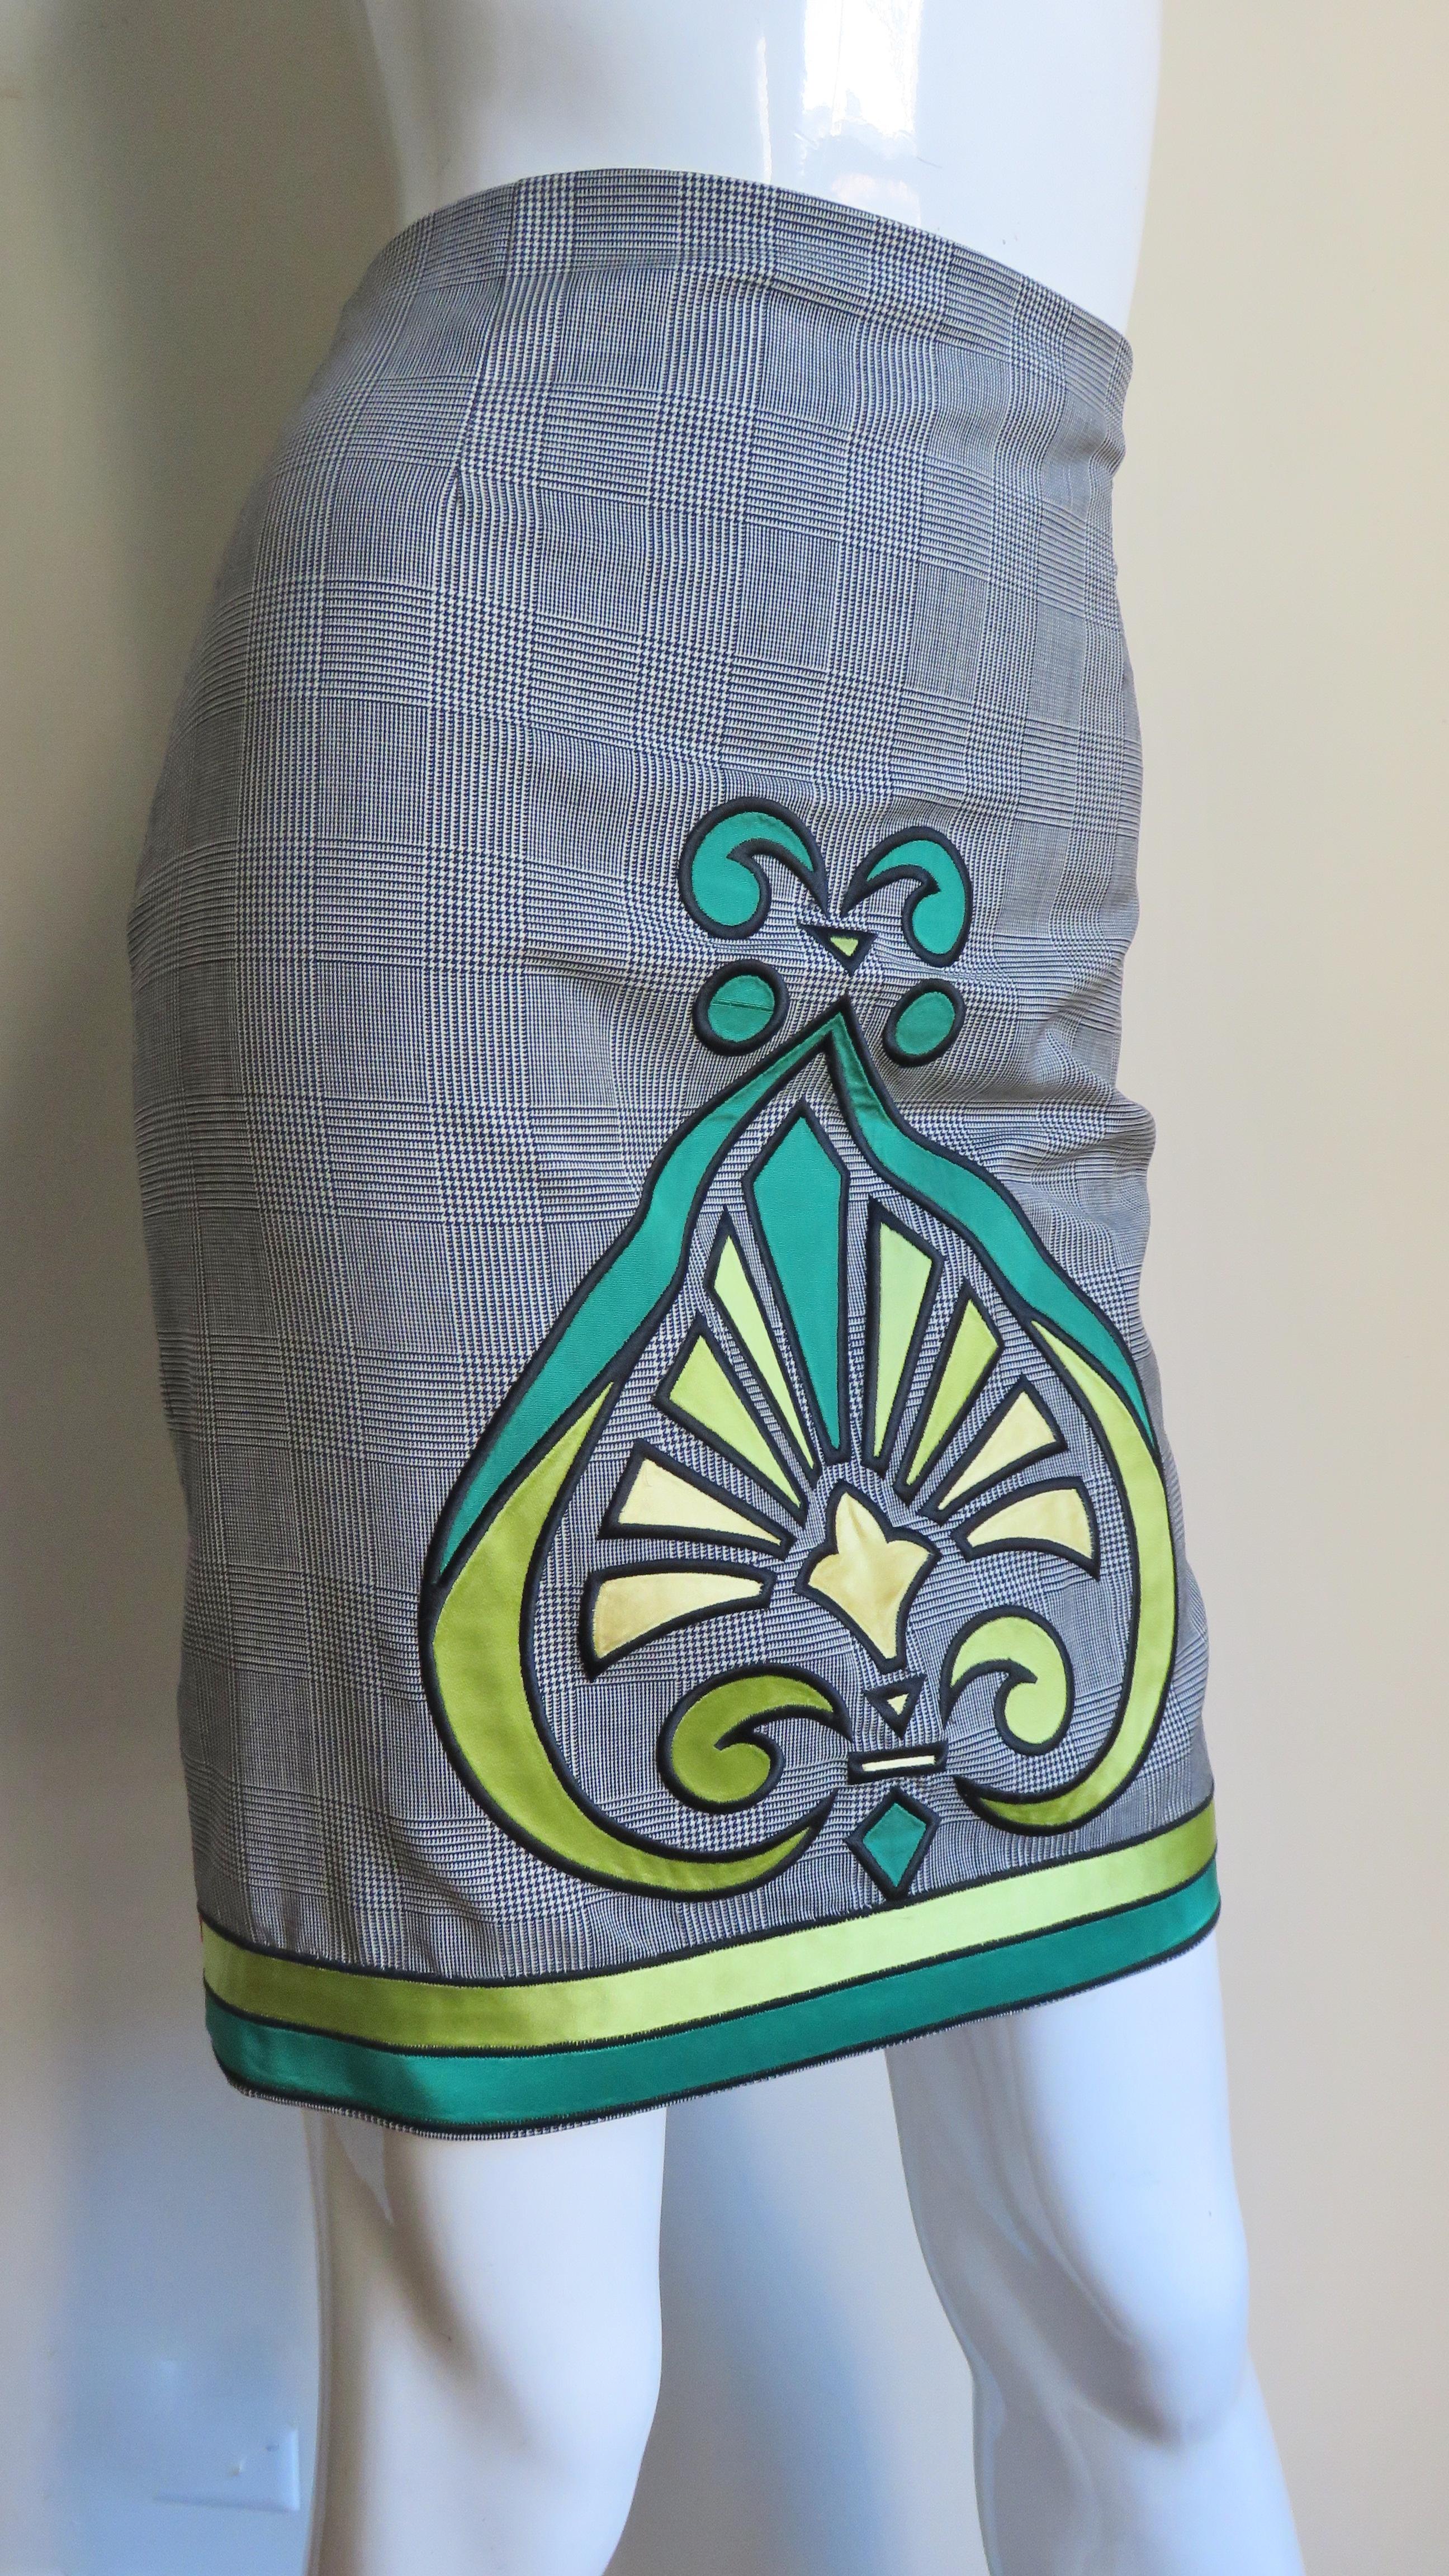 Women's Gianni Versace Reversible Skirt with Elaborate Applique 1990s For Sale